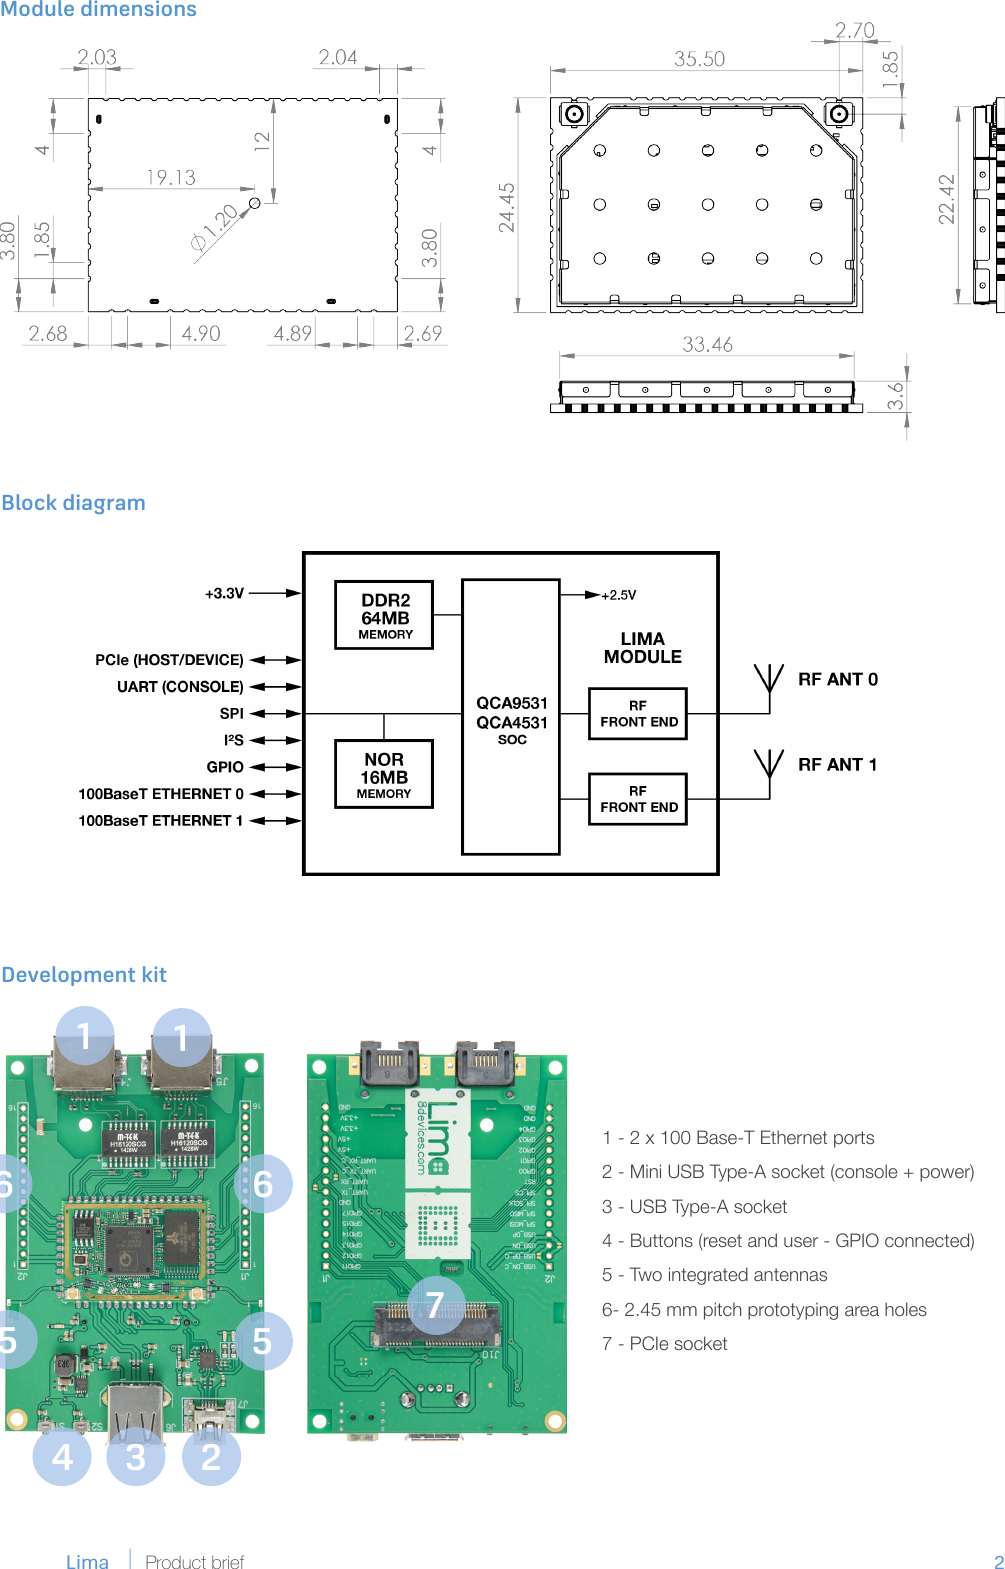 2              Lima Product briefBlock diagramDevelopment kitModule dimensions 11234556 671 - 2 x 100 Base-T Ethernet ports2 - Mini USB Type-A socket (console + power)3 - USB Type-A socket4 - Buttons (reset and user - GPIO connected)5 - Two integrated antennas6- 2.45 mm pitch prototyping area holes7 - PCIe socket